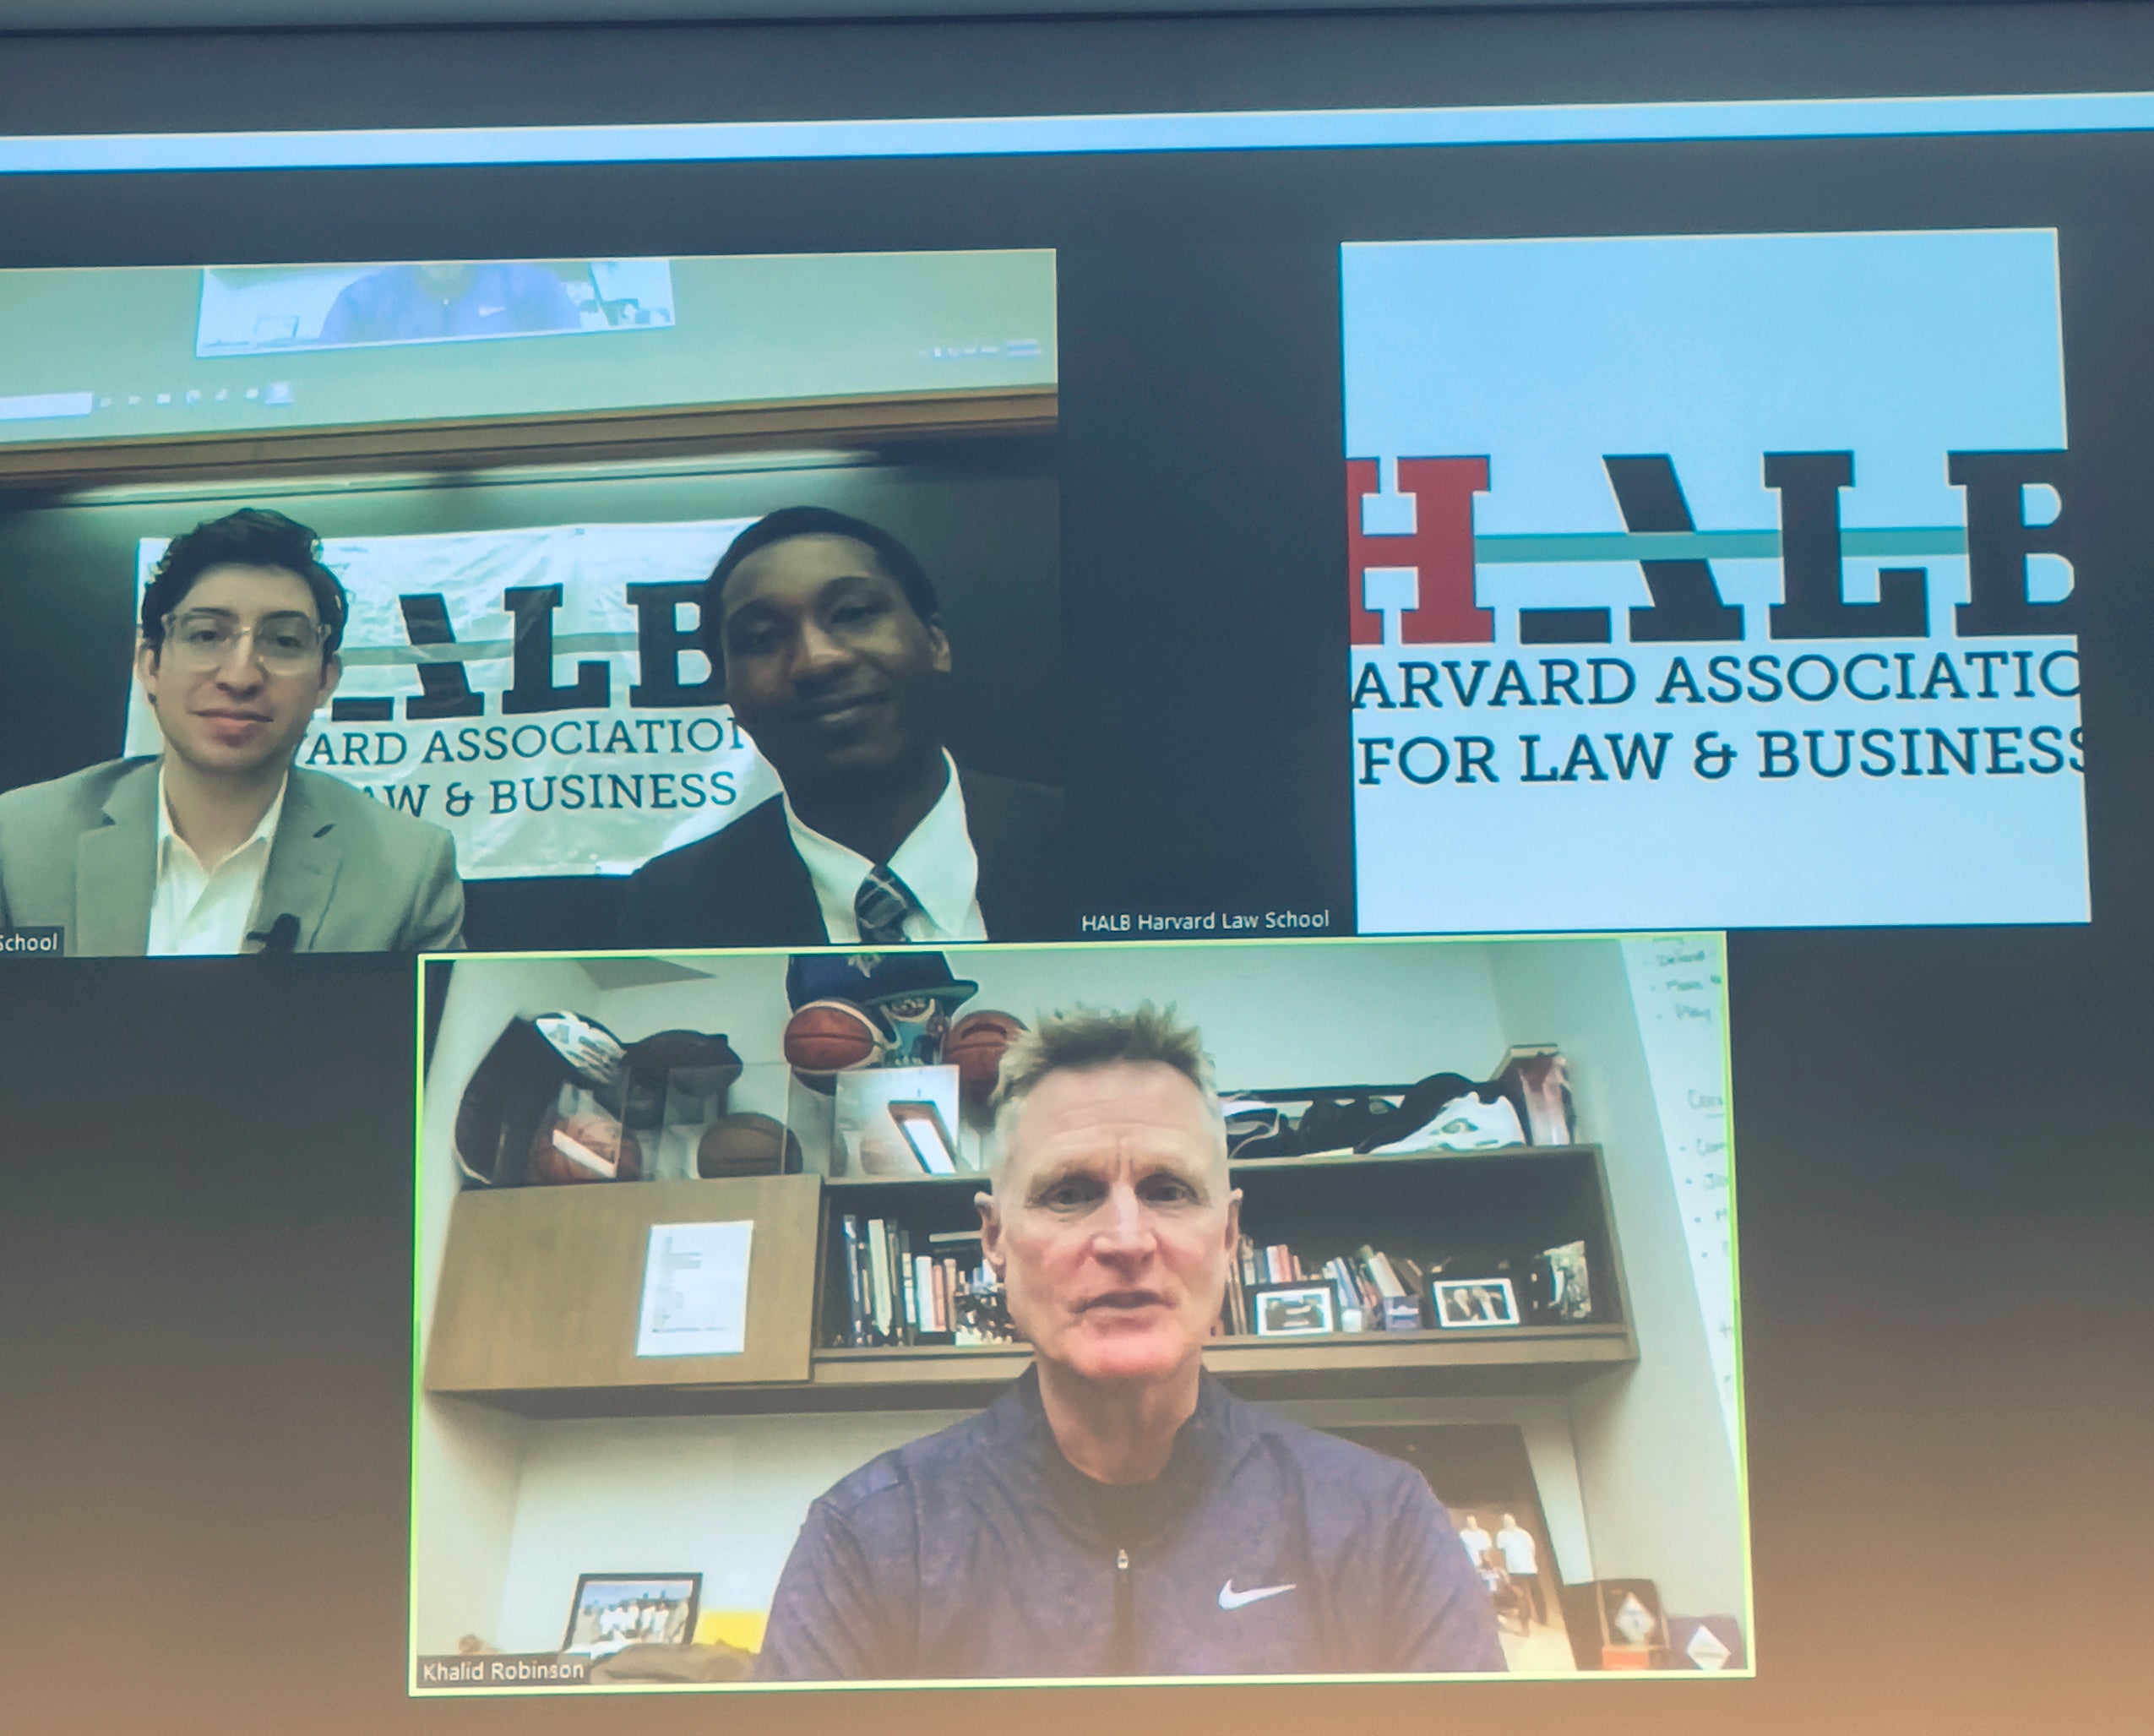 A screen shot of a man and two students at an online event sponsored by the Harvard Association for Law and Business